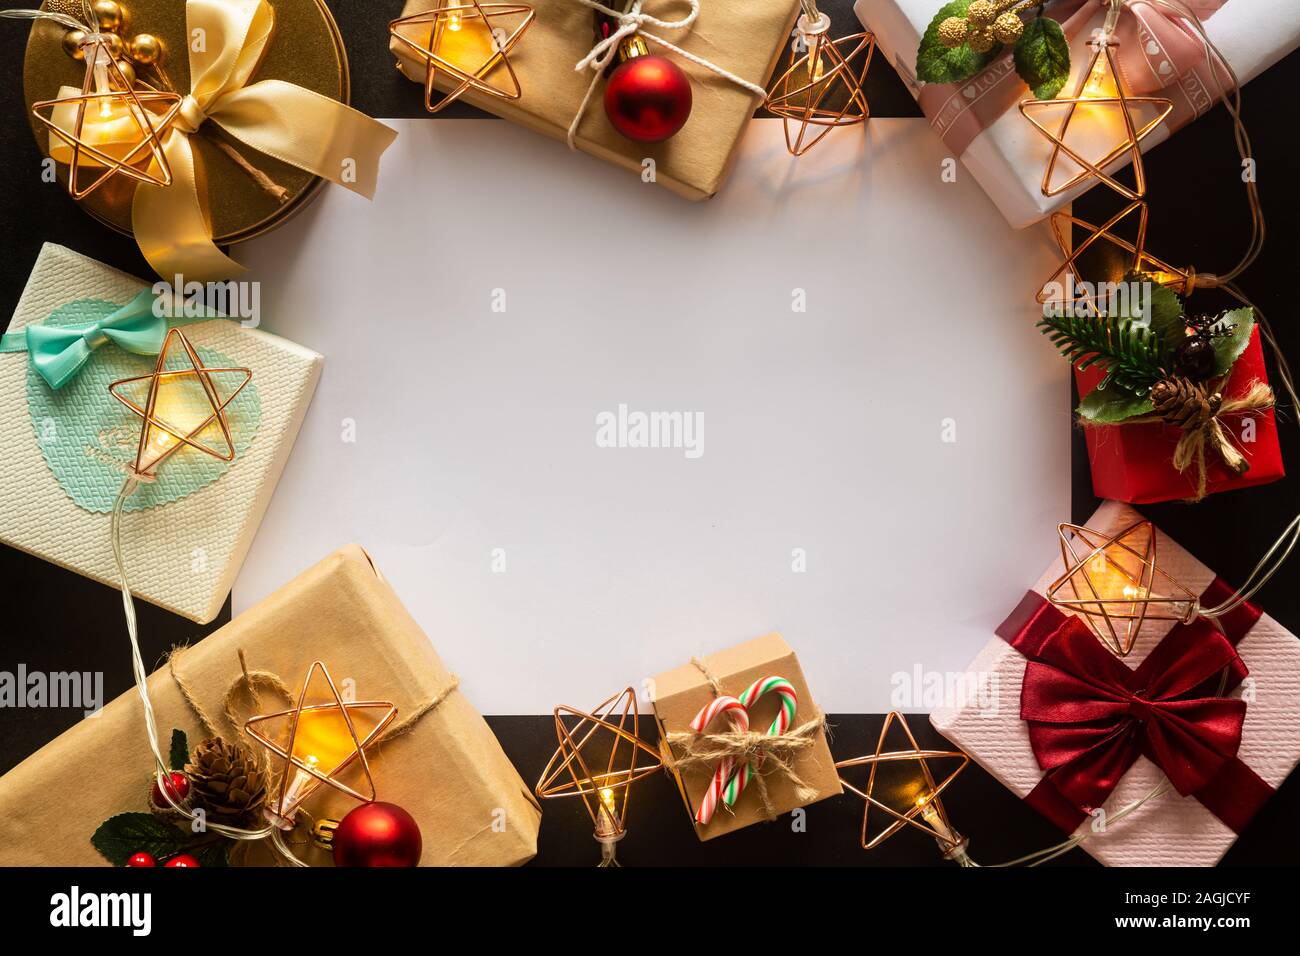 Holiday Christmas card background with festive decoration ball, stars, snowflakes, gift box, pine cones on a black background from Flat lay, top view. Stock Photo